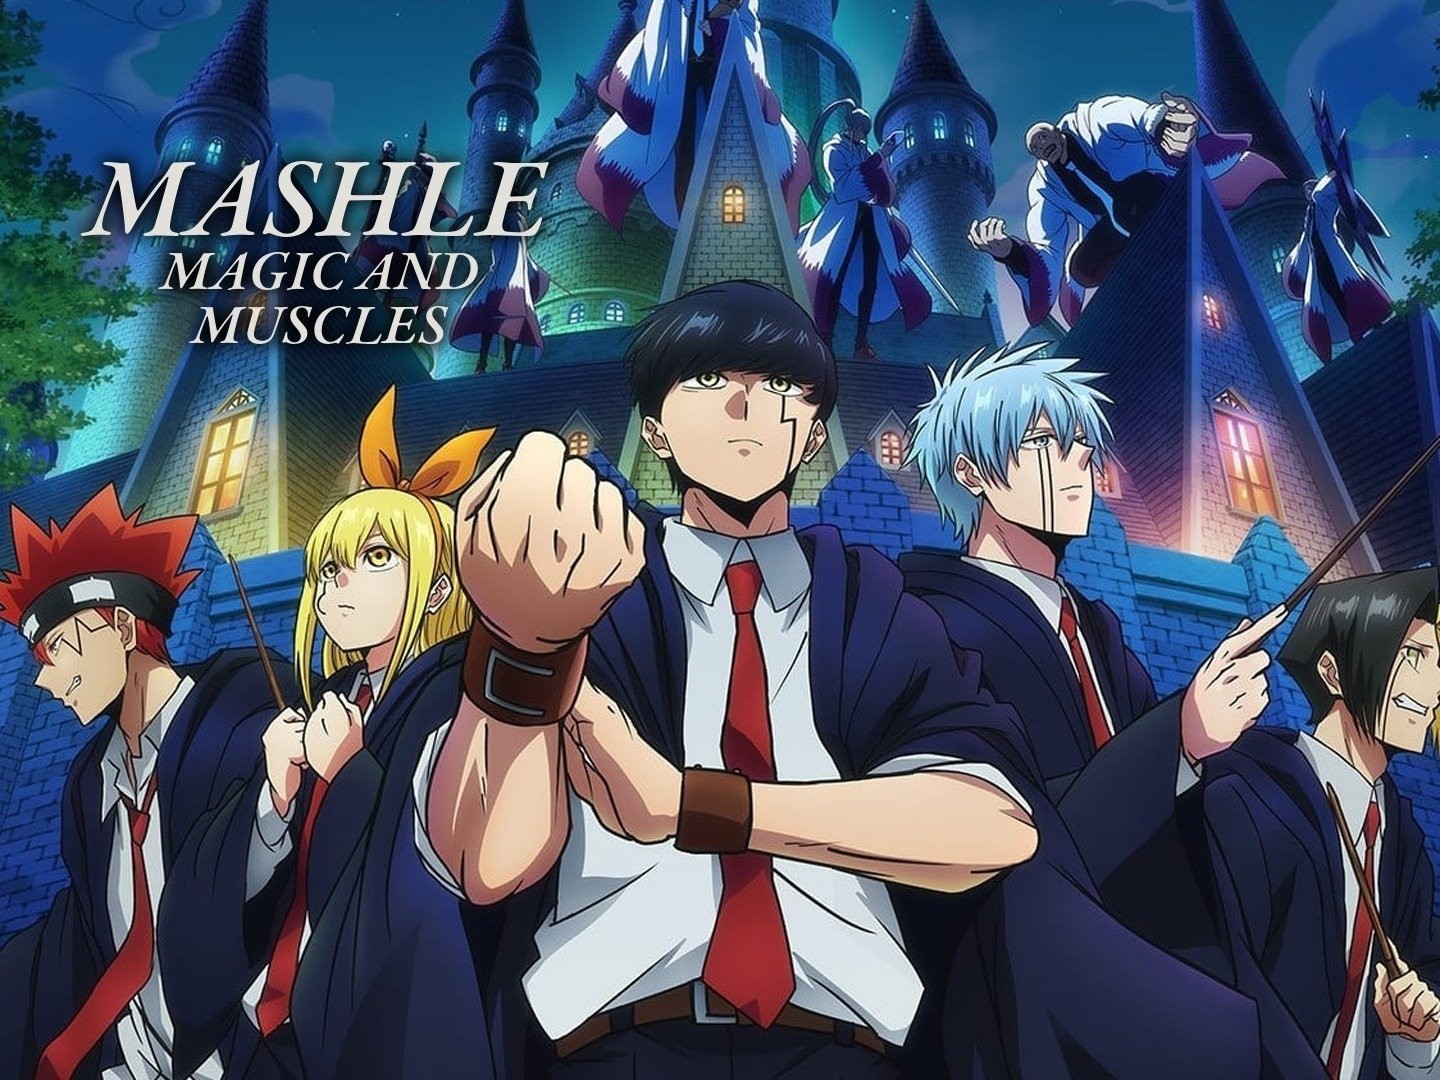 MASHLE: MAGIC AND MUSCLES Mash Burnedead and the Unpopular Classmate -  Watch on Crunchyroll